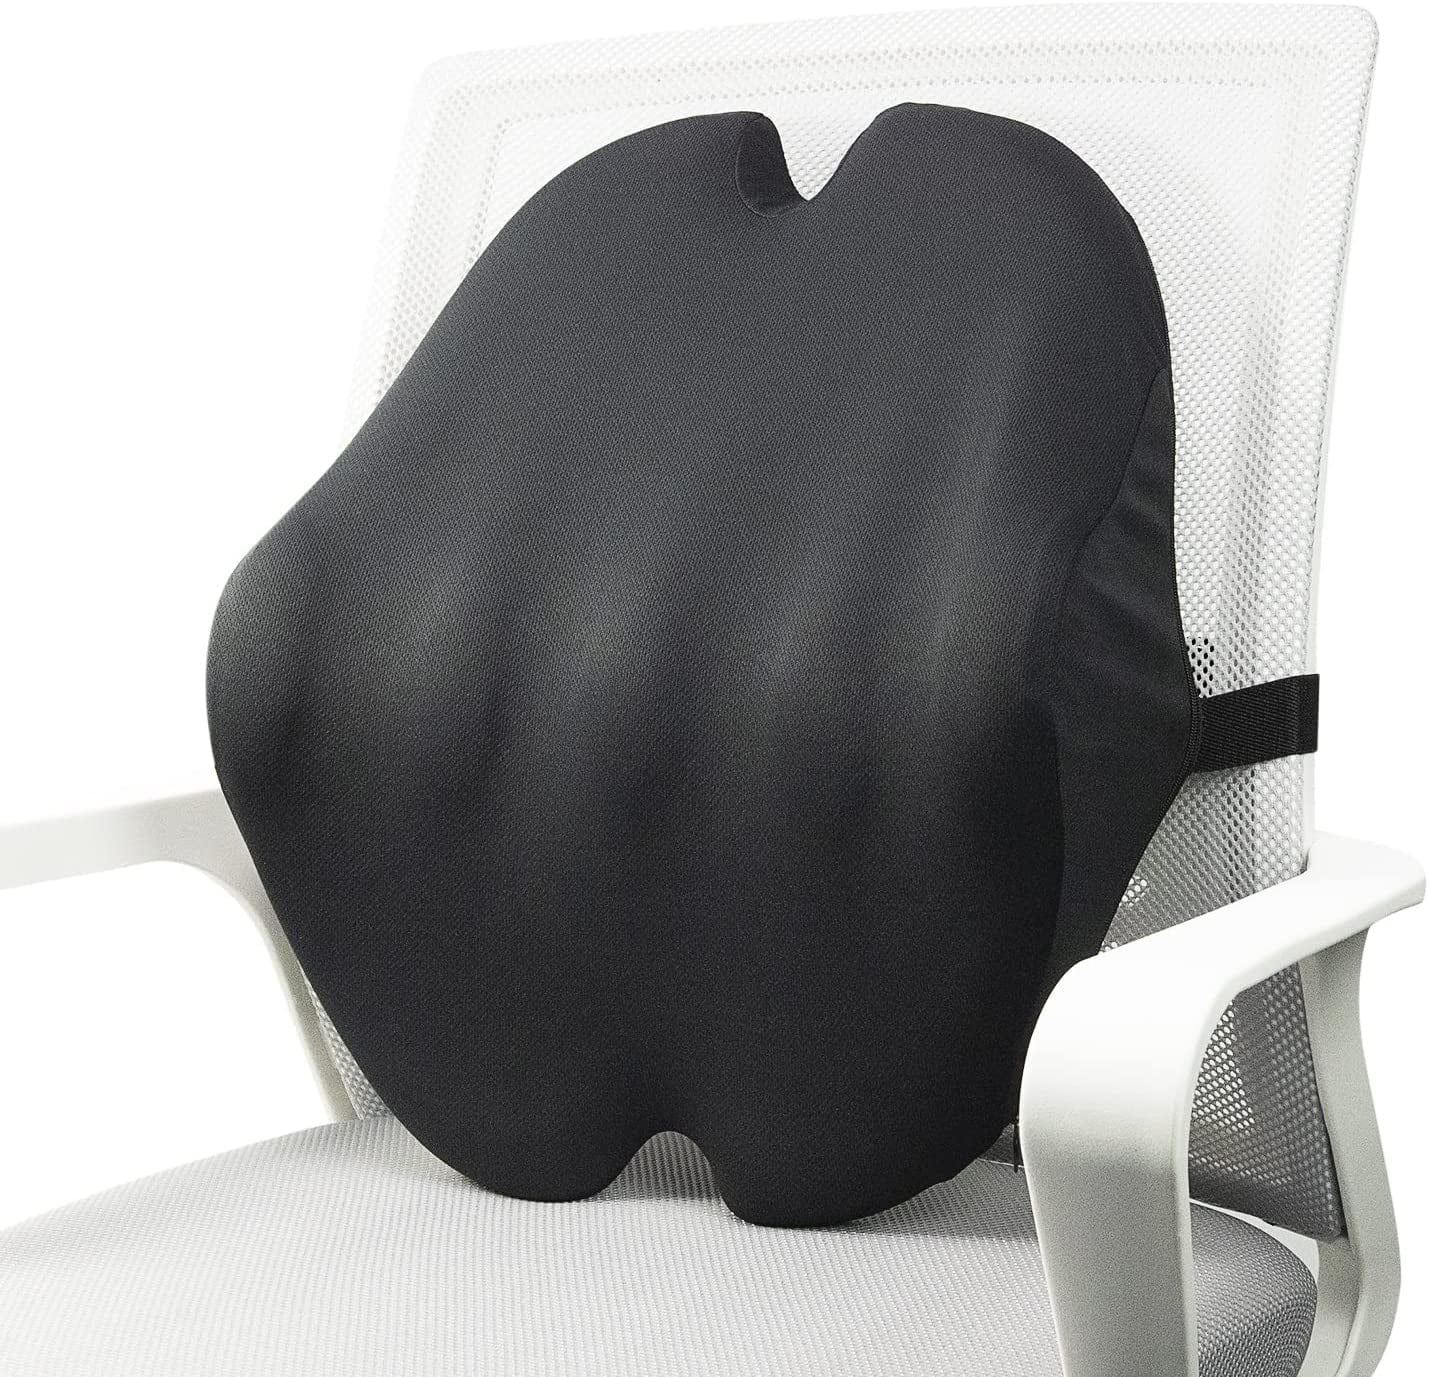 WENNEBIRD Model Q Lumbar Support Pillow - Patented Ergonomic Back Support  for Lower Back Pain Relief for Office Chair, Car, Sofa, Plane, Couch,  Recliner - Black Auction